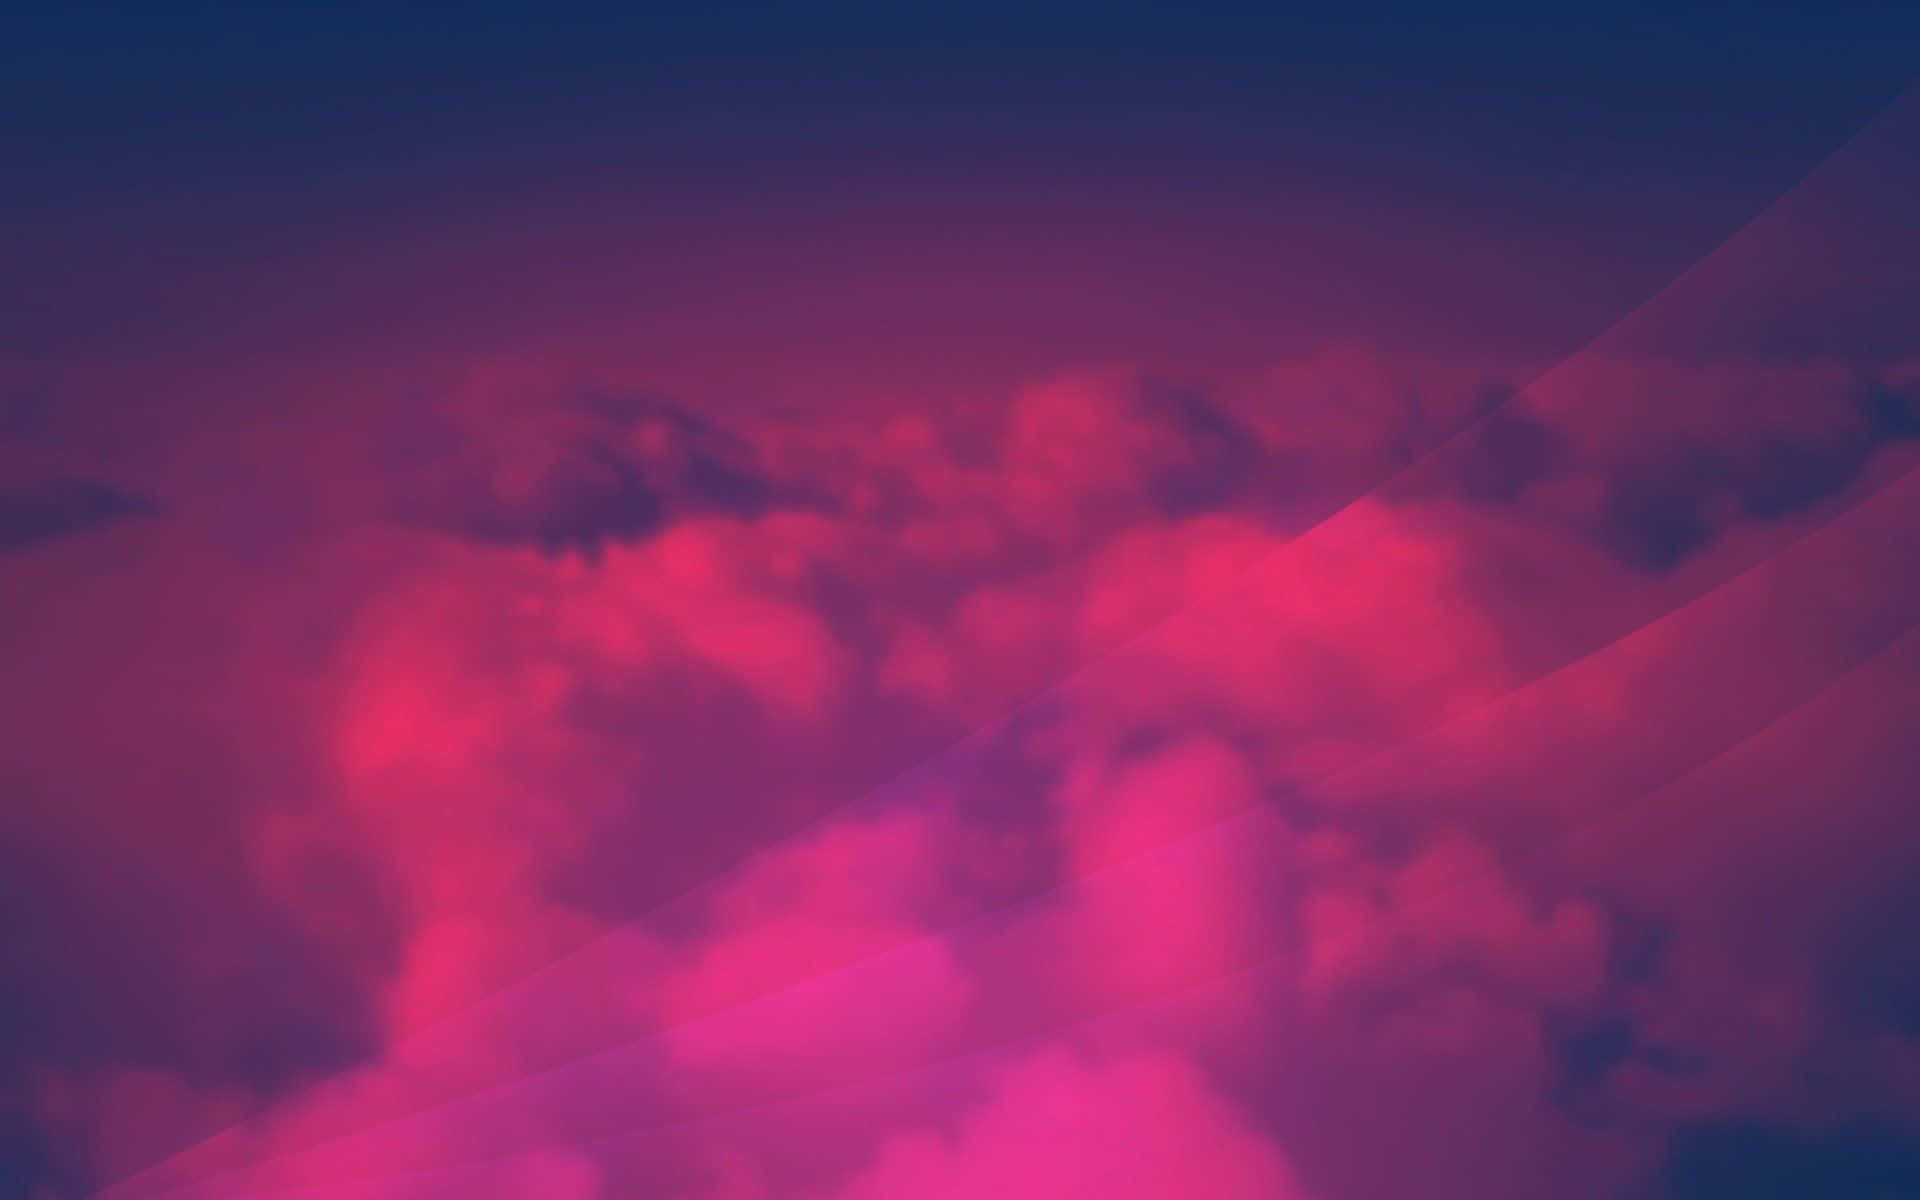 An abstract background featuring pink and red colors